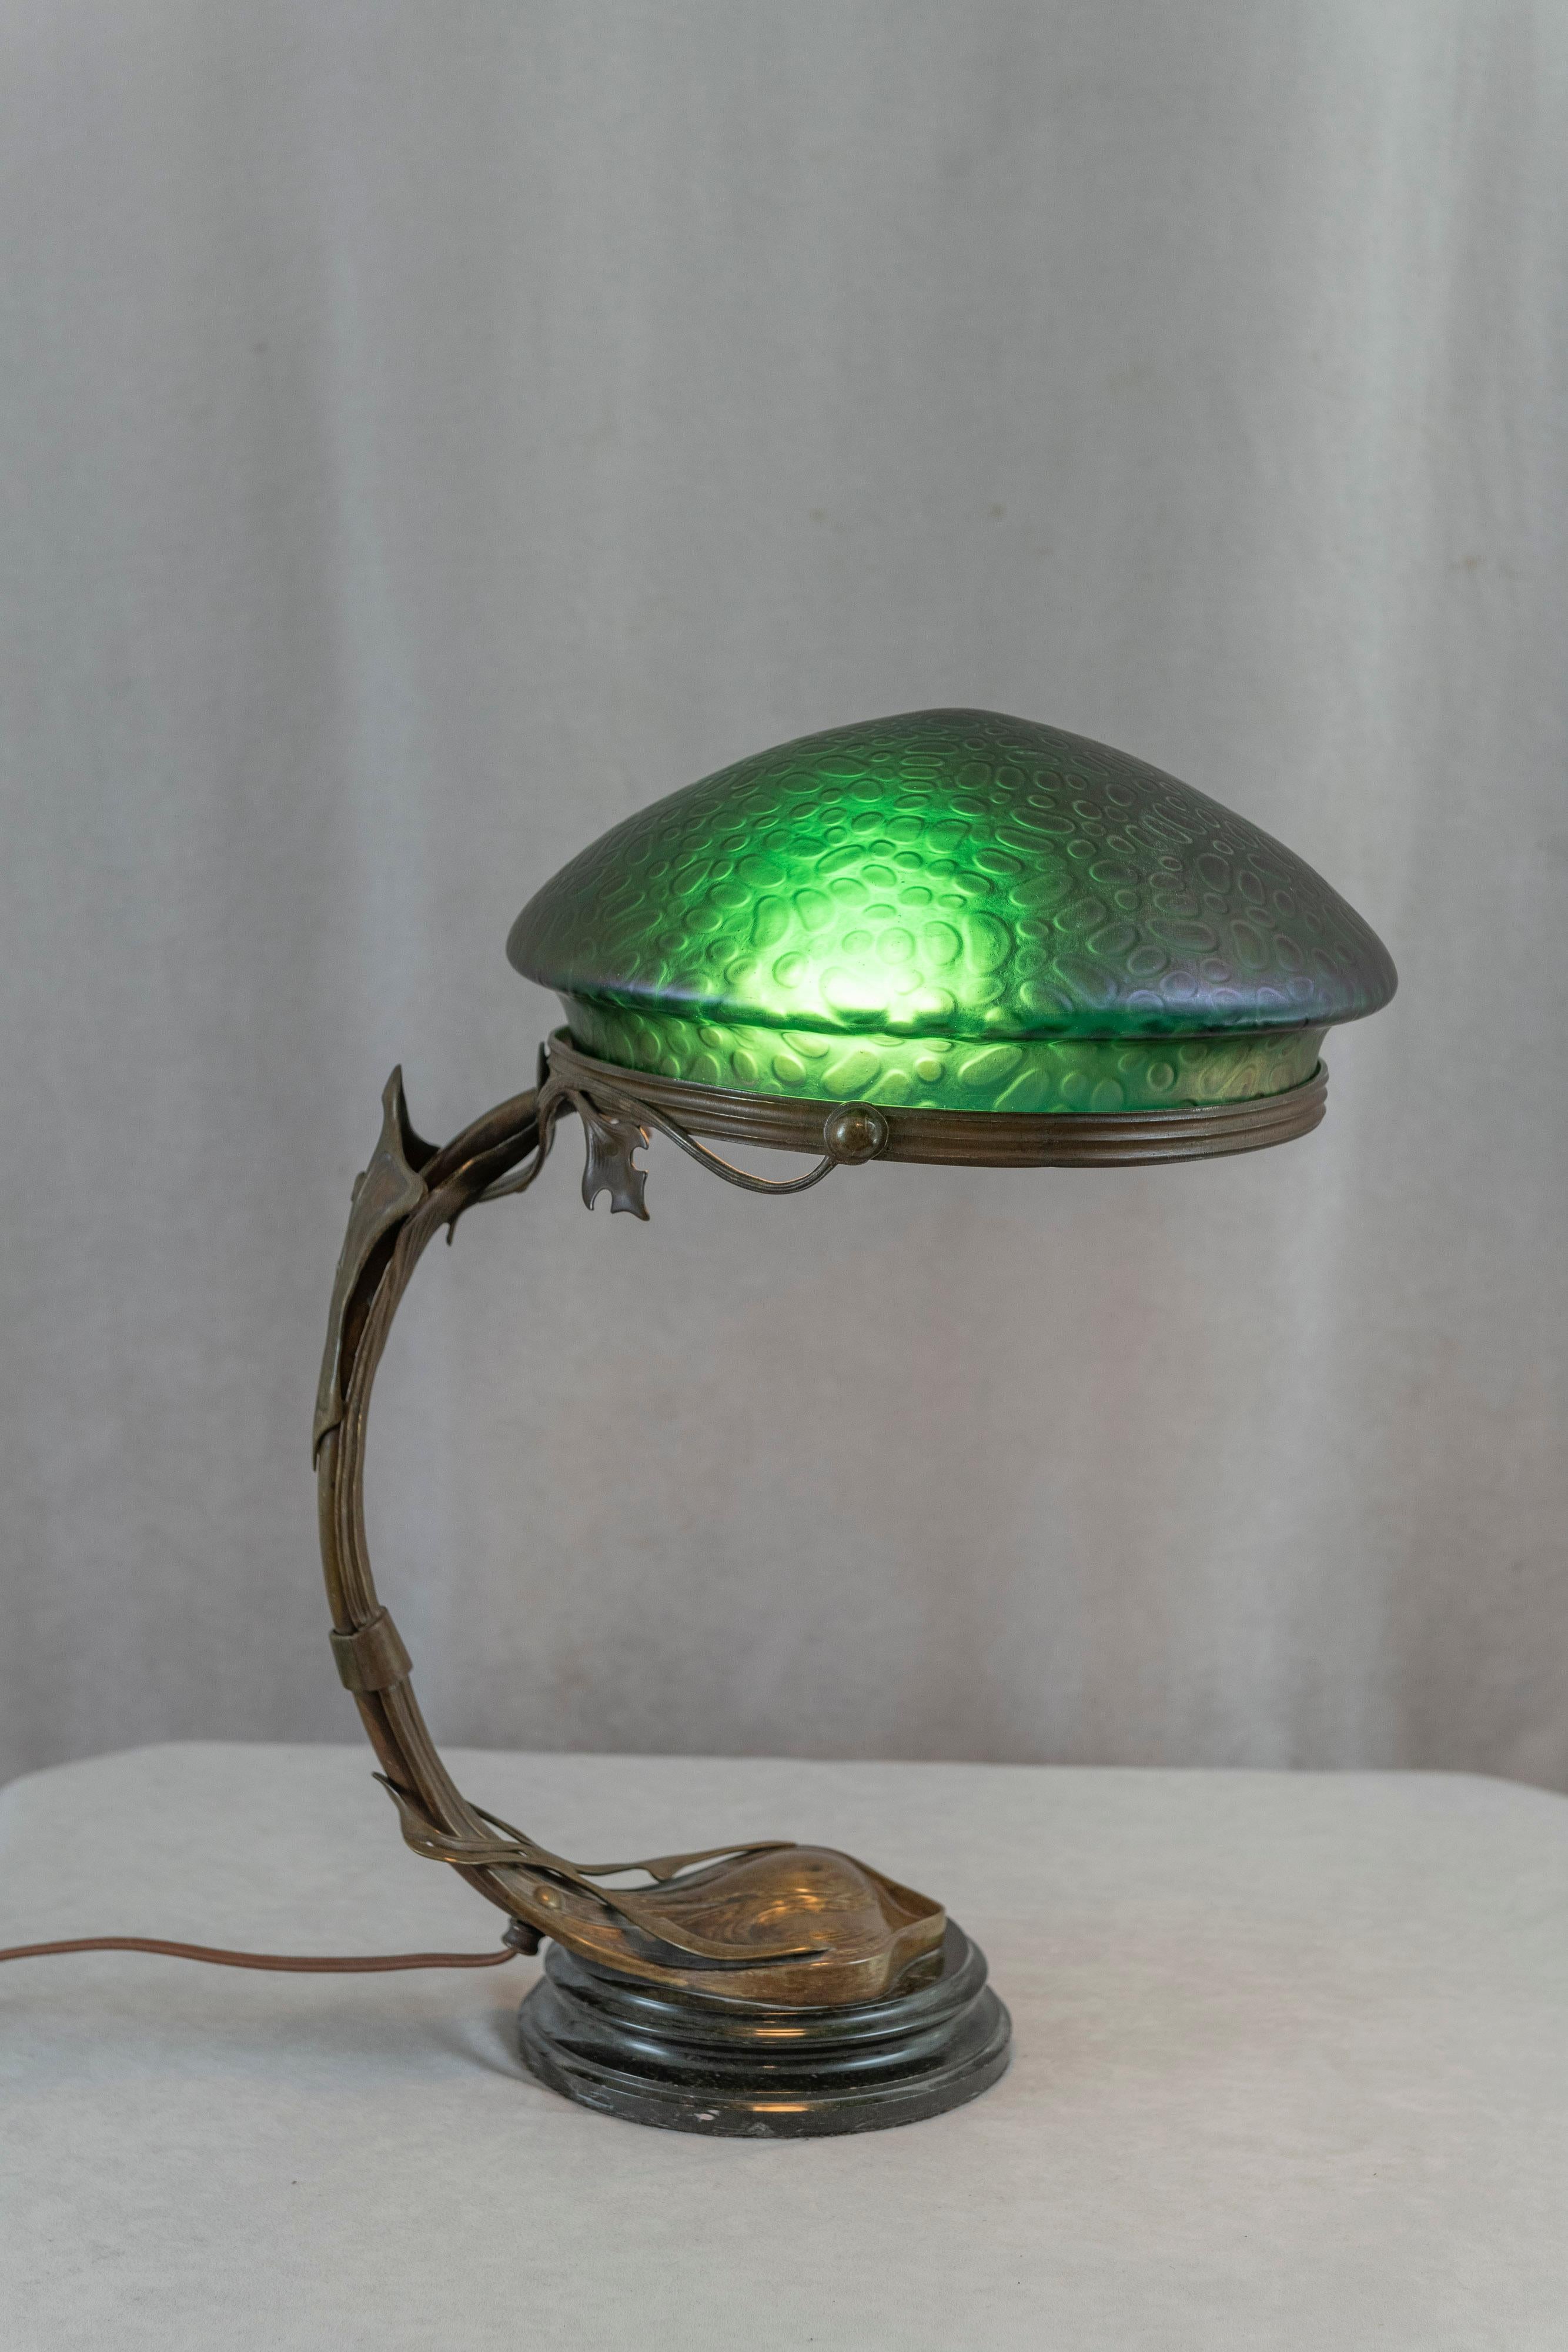 A fine example of Art Nouveau lighting. The bronze base is richly patinated and beautifully cast with an art nouveau design. The shade is a deep green when lit and purple and green when unlit. That's its iridescent quality. The shade is very much in